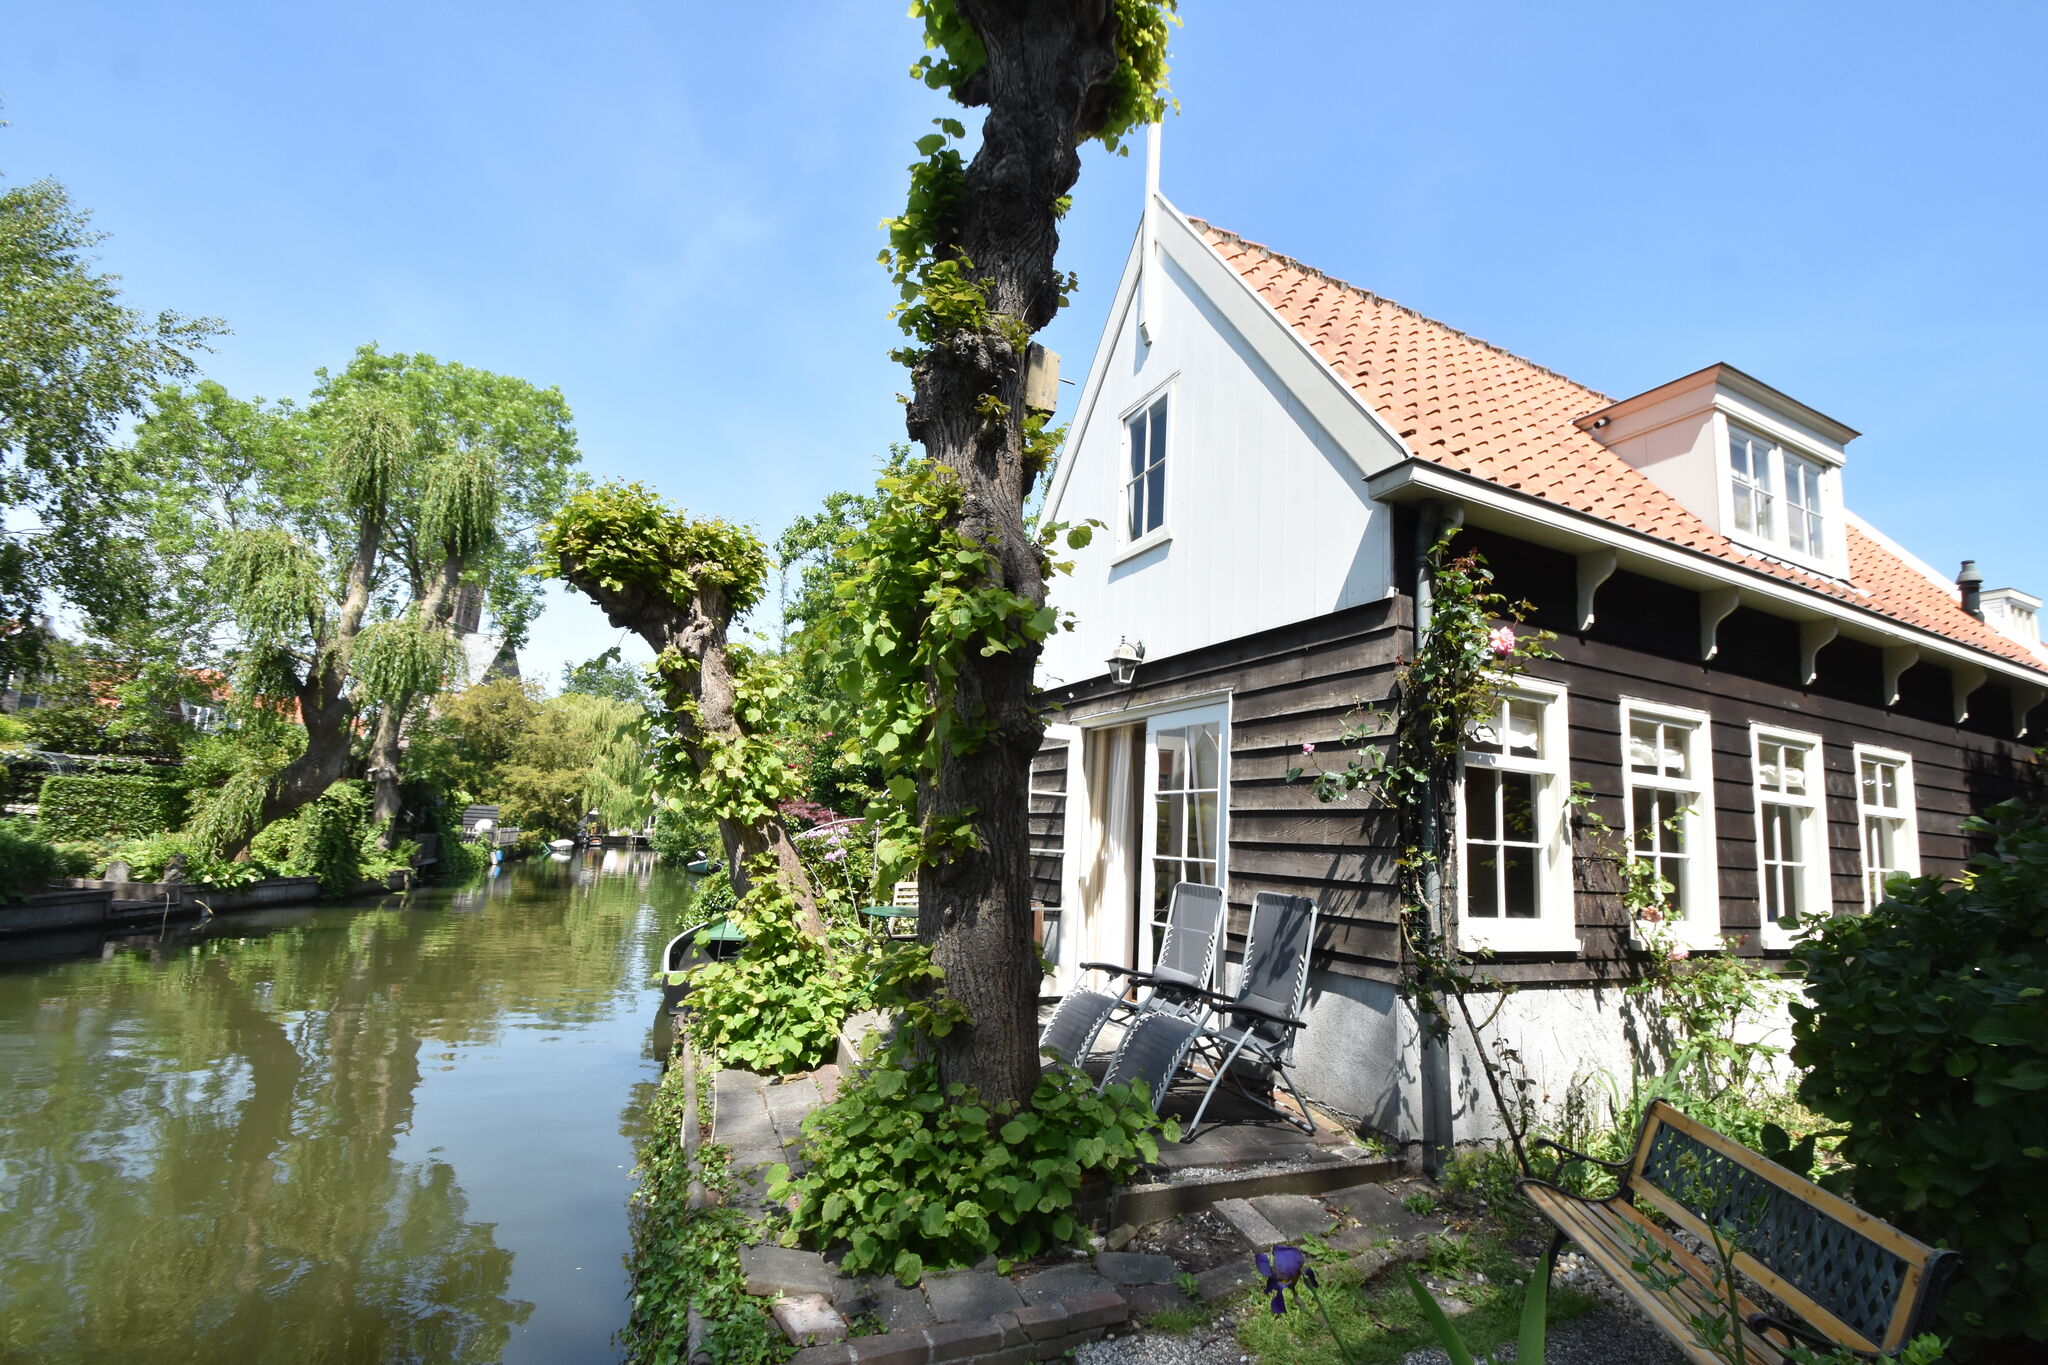 Charming house in the center of Edam